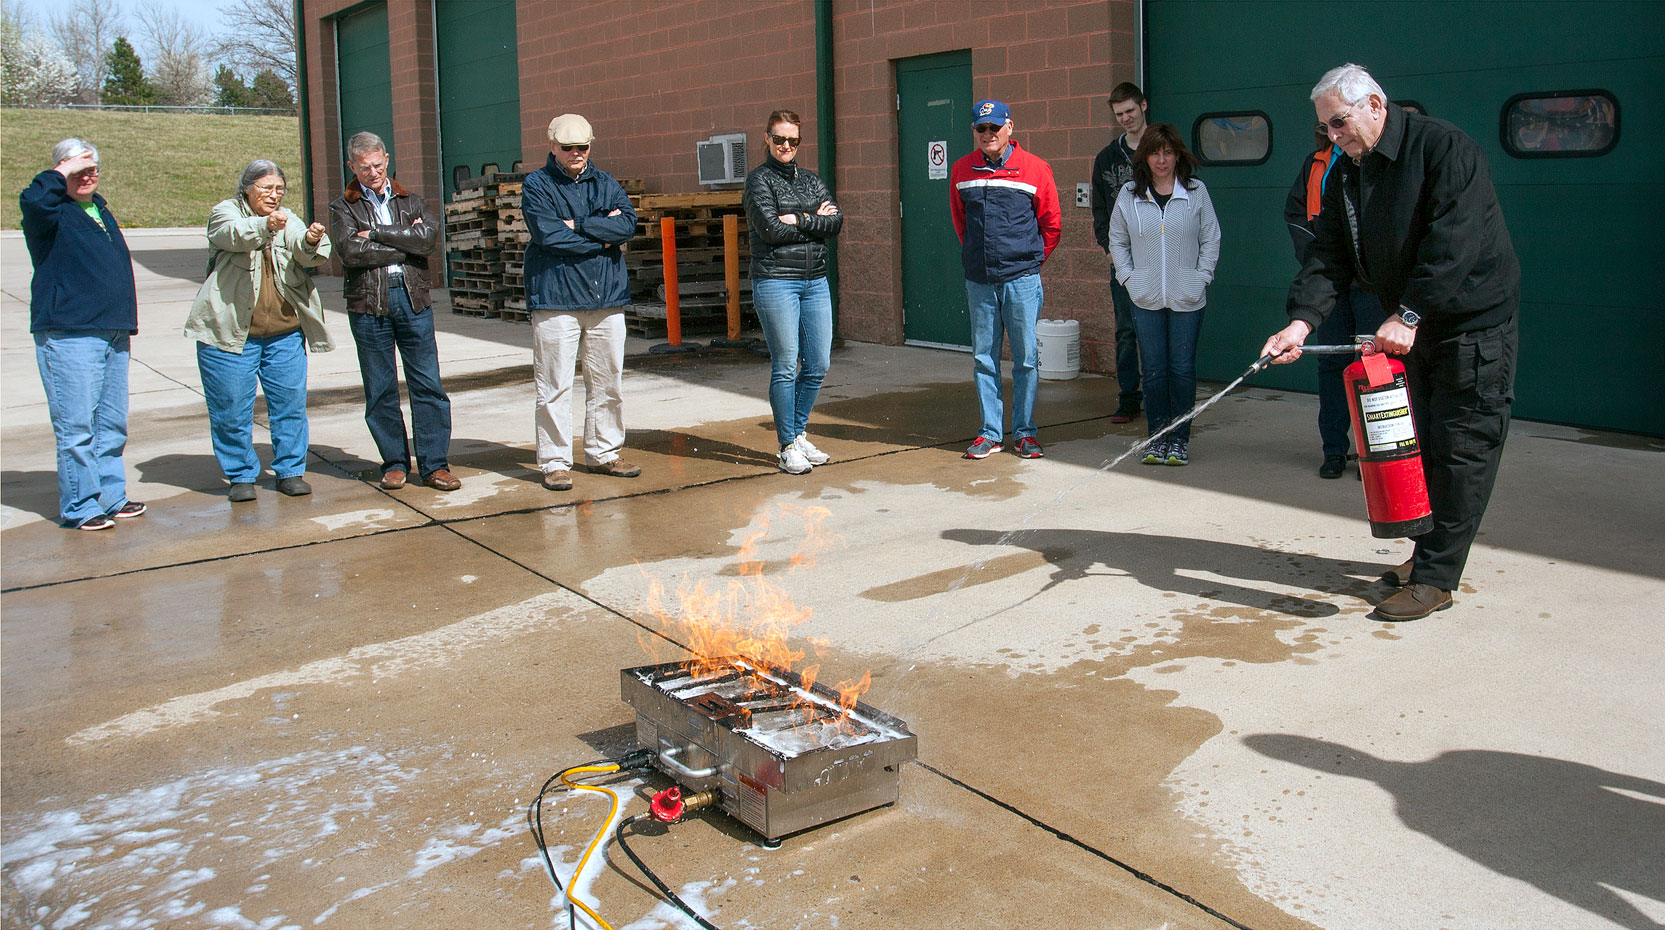 Man hold fire extinguisher to put out gas grill fire in fire safety training while group watches in background